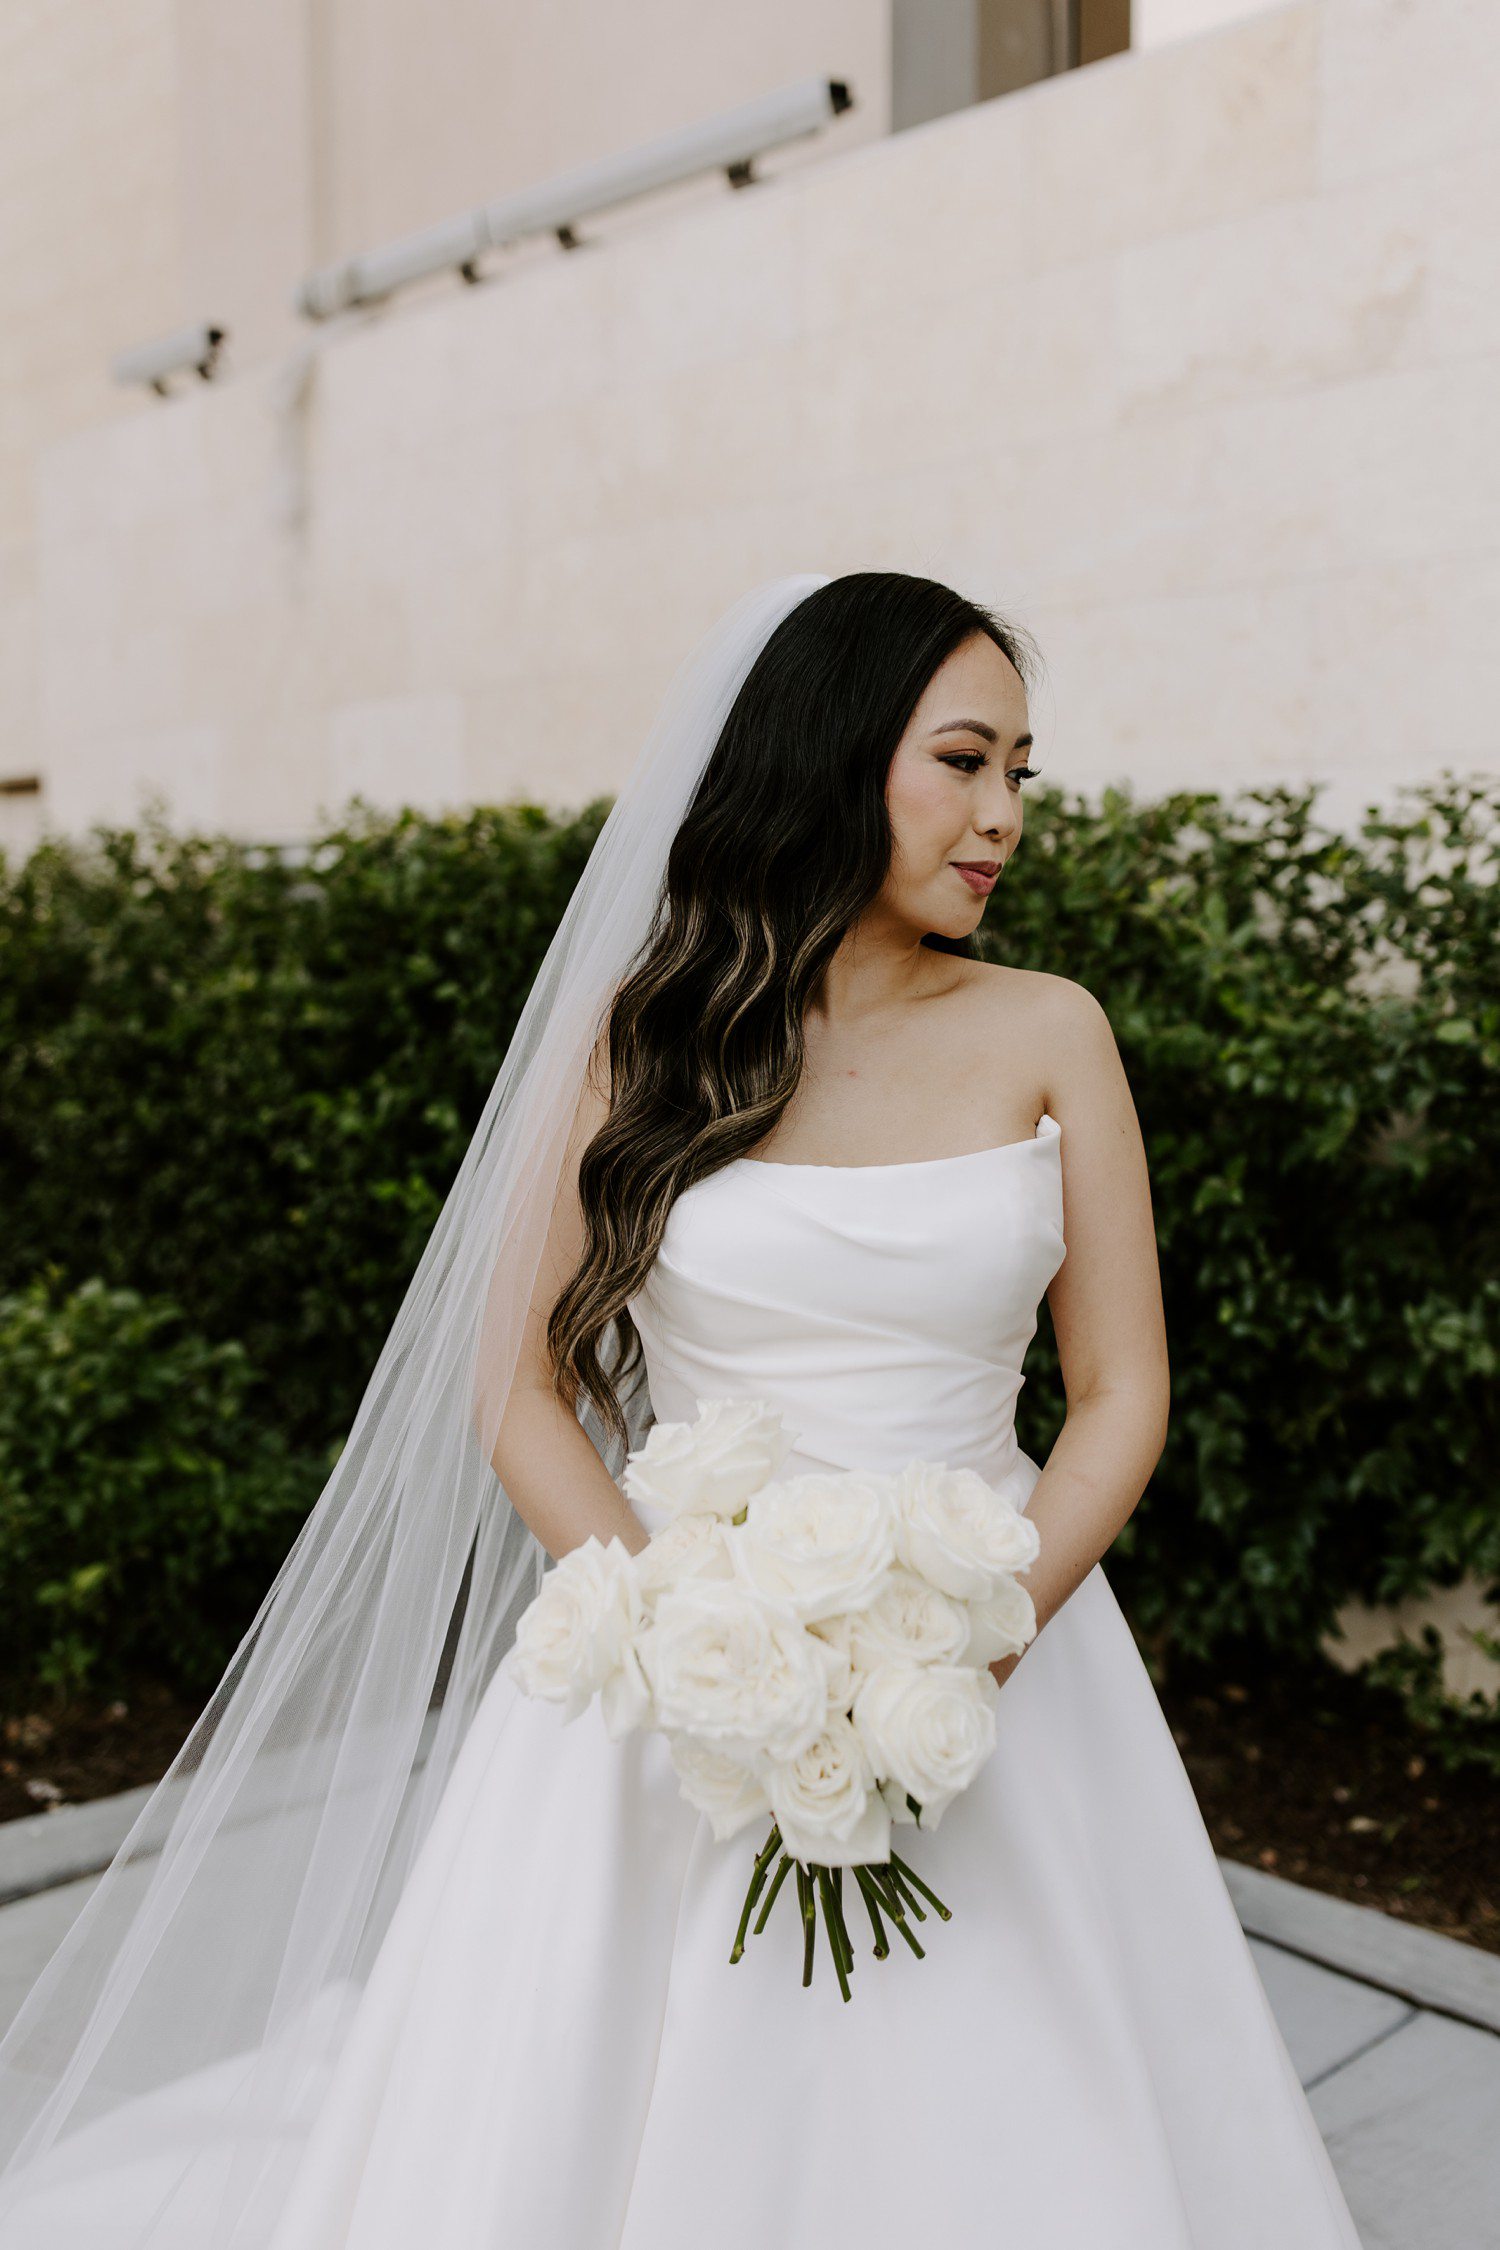 Bridal portraits with veil and white rose bridal bouquet.